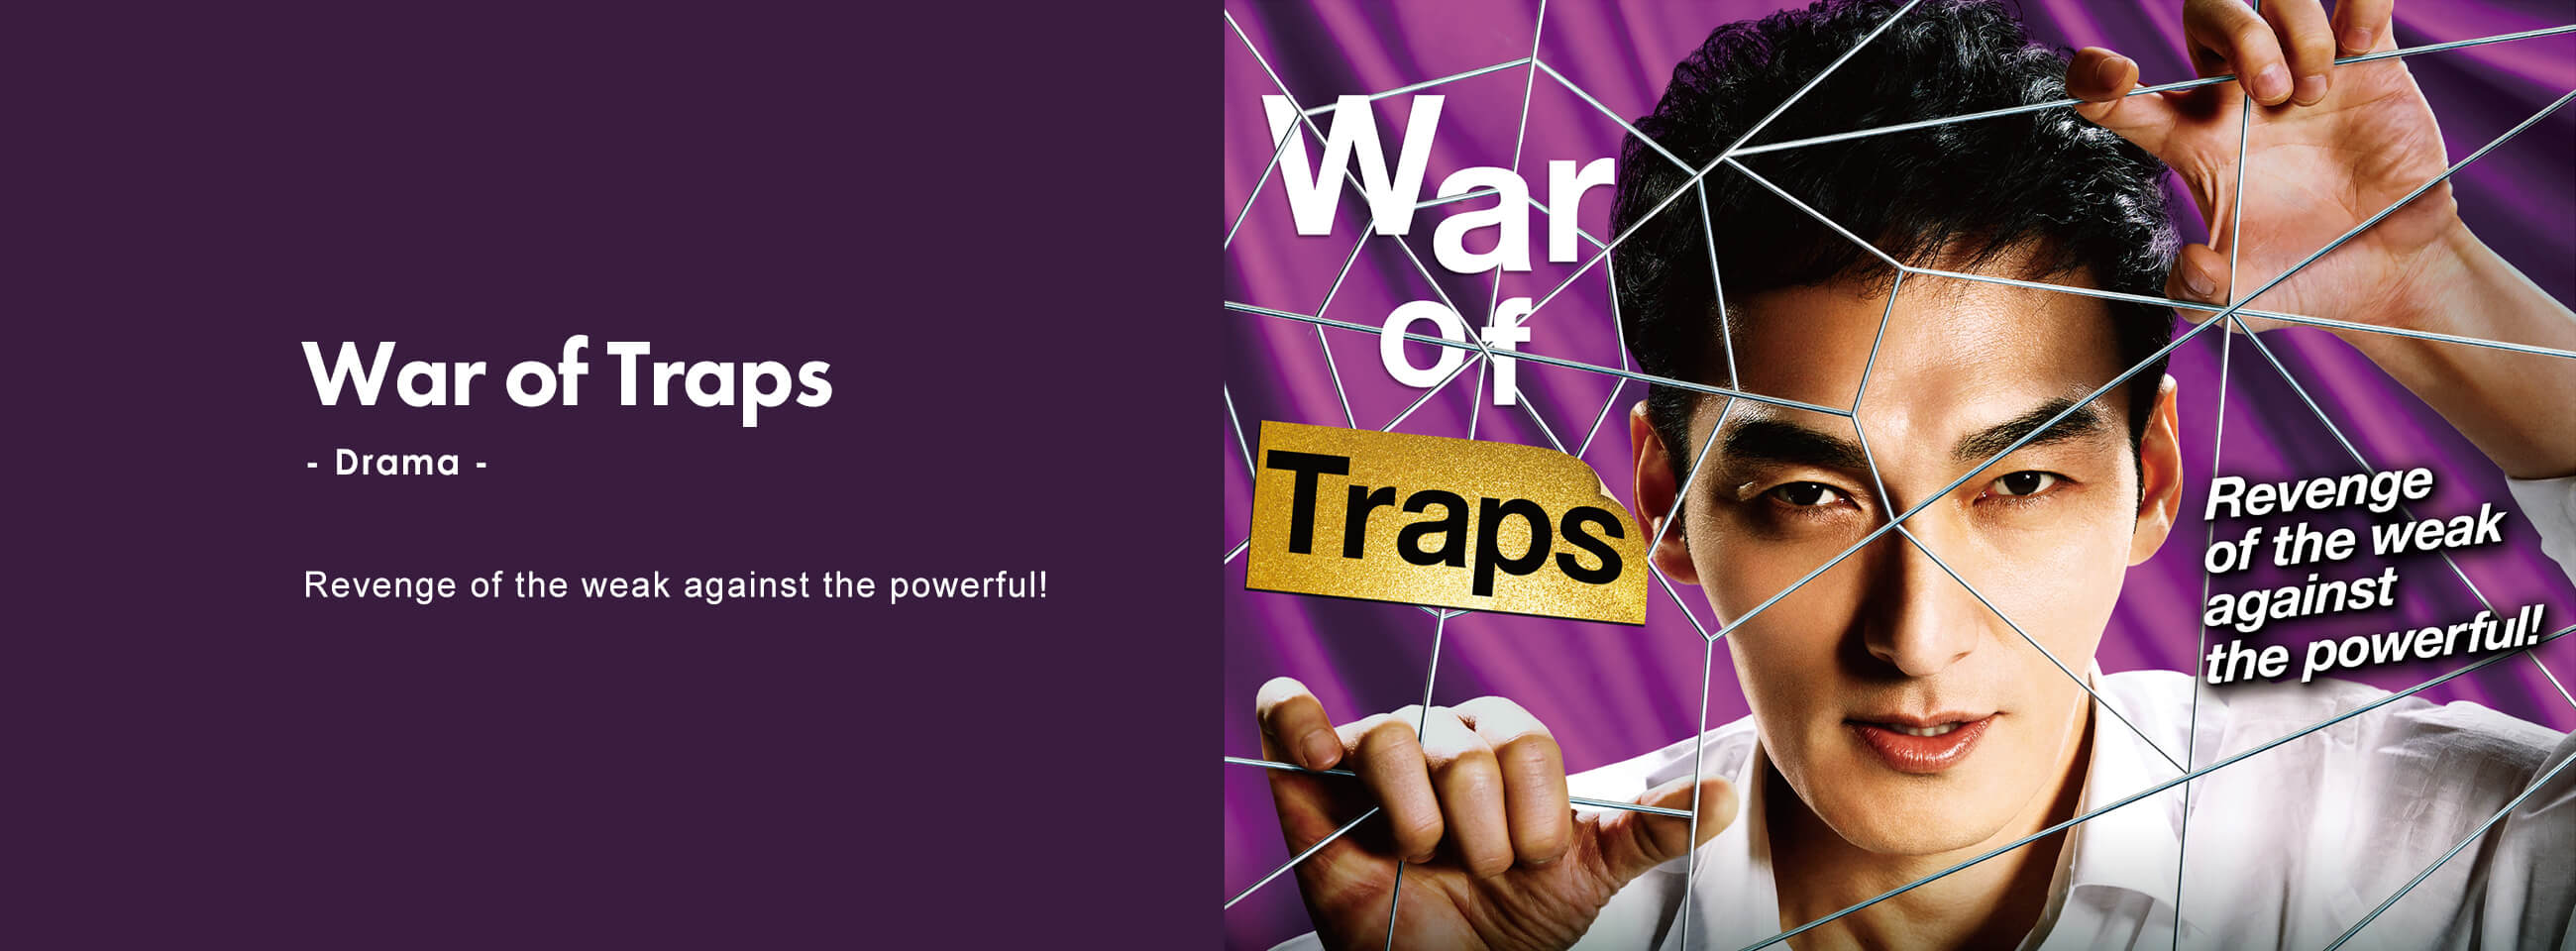 War of Traps - Drama - Revenge of the weak against the powerful!